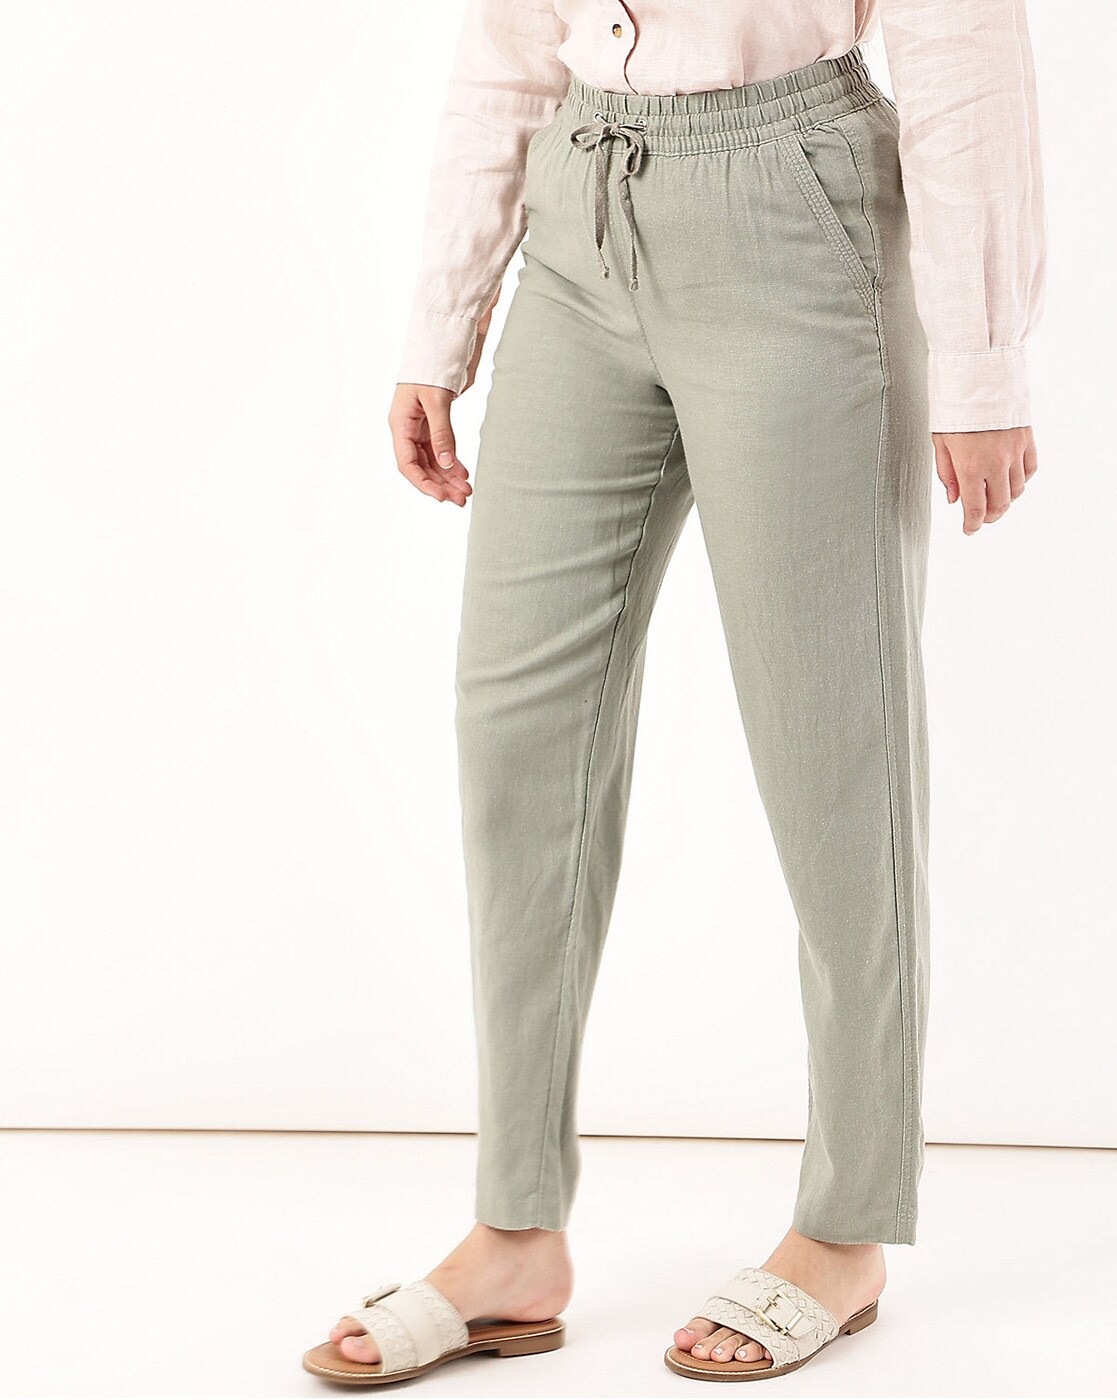 FableStreet Bottoms Pants and Trousers  Buy FableStreet Linen Elasticated  Straight Fit Pants  Beige Online  Nykaa Fashion